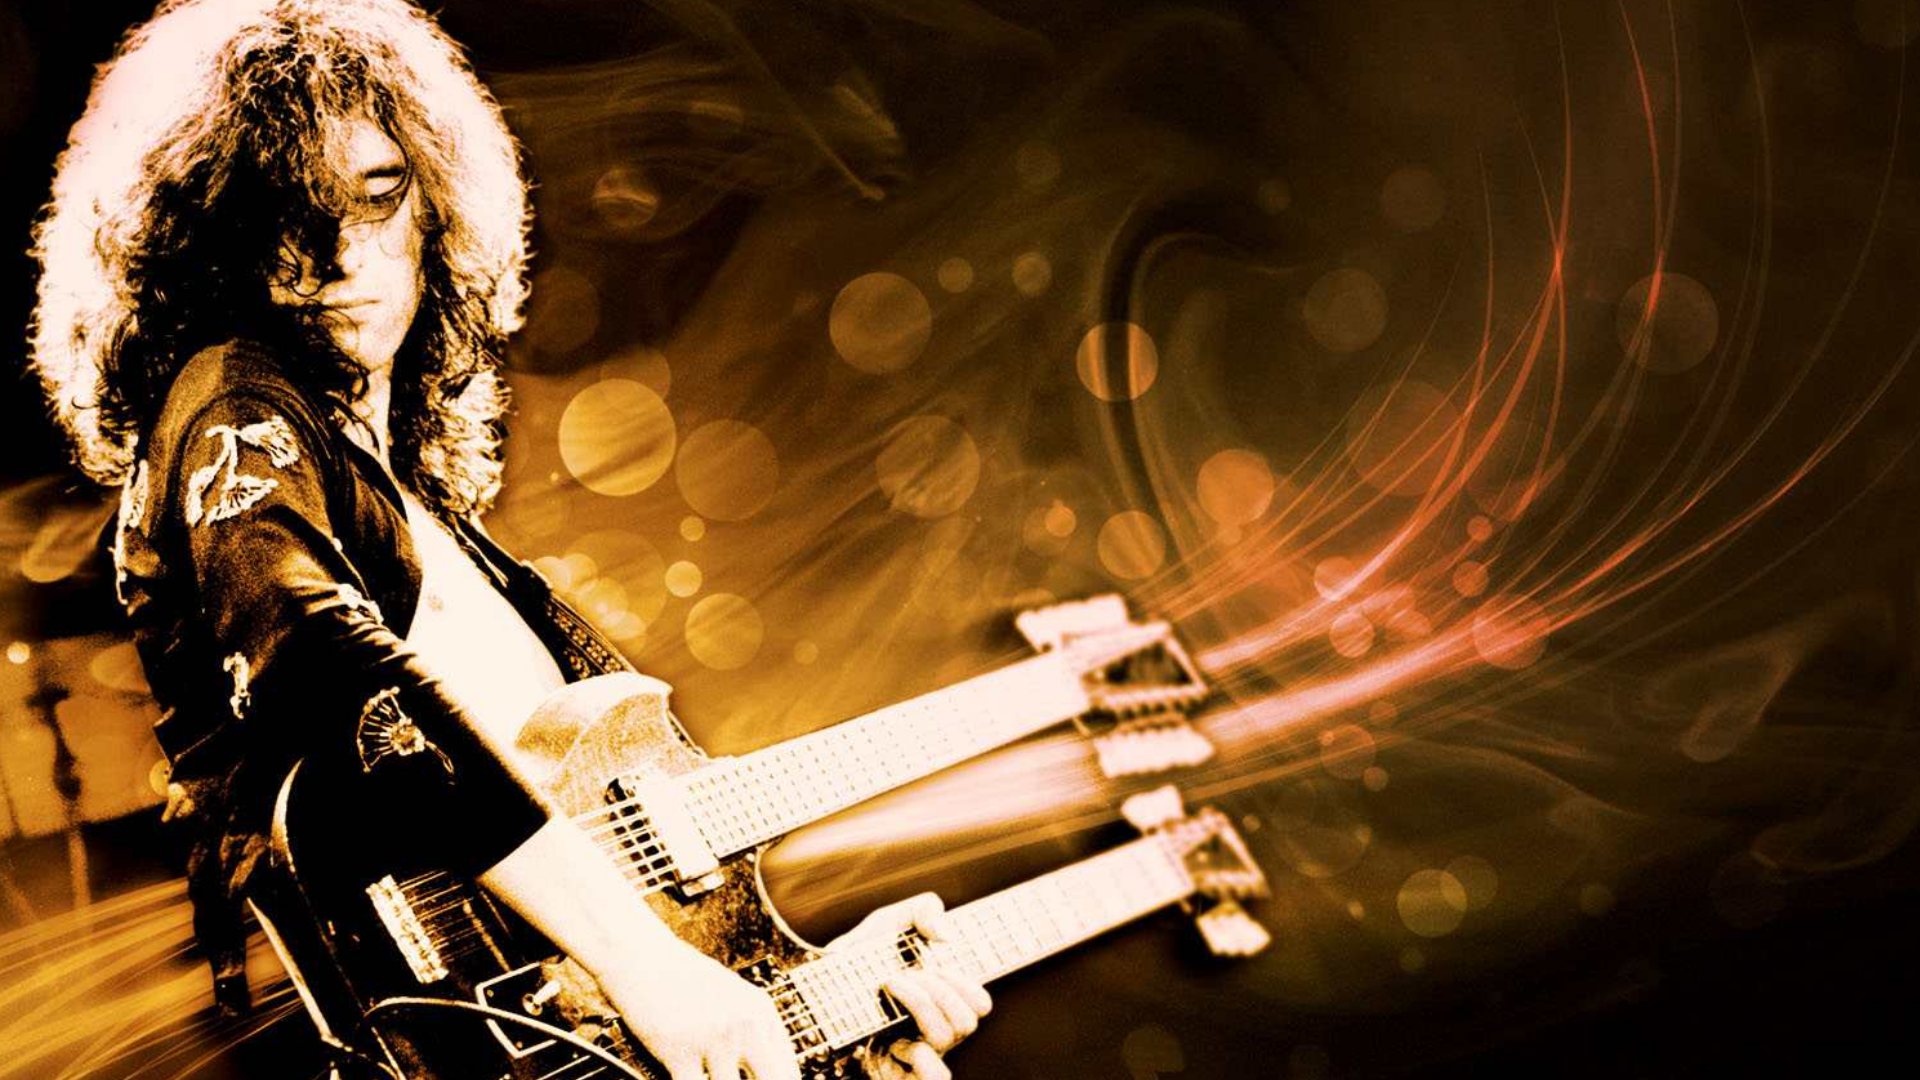 led, Zeppelin, Hard, Rock, Classic, Groups, Bands, Jimmy, Page, Robert, Plant, Album, Covers, Guitars Wallpaper